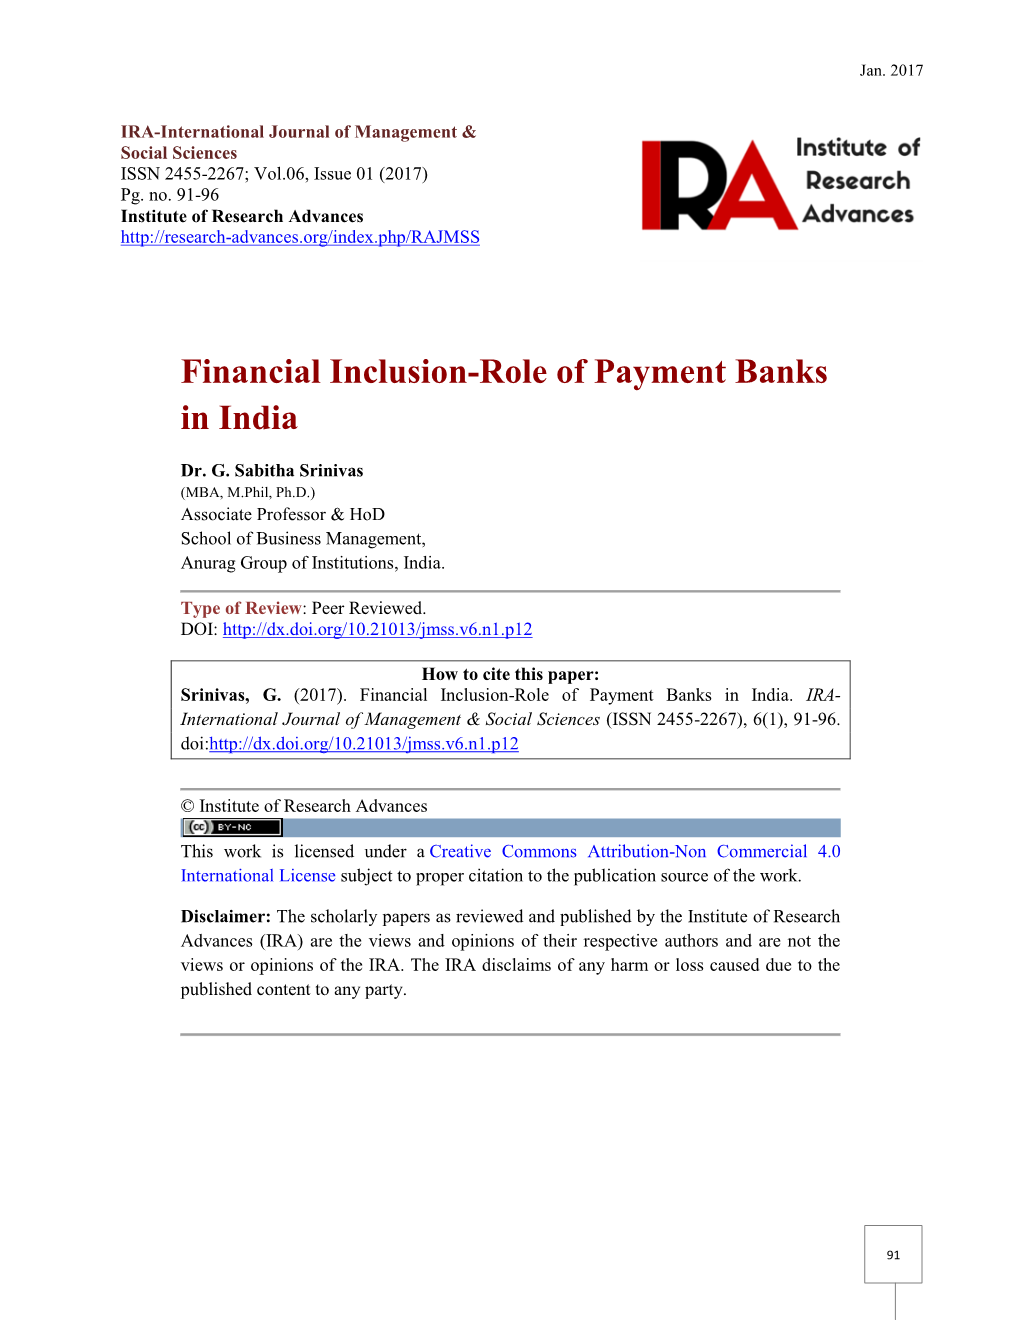 Financial Inclusion-Role of Payment Banks in India